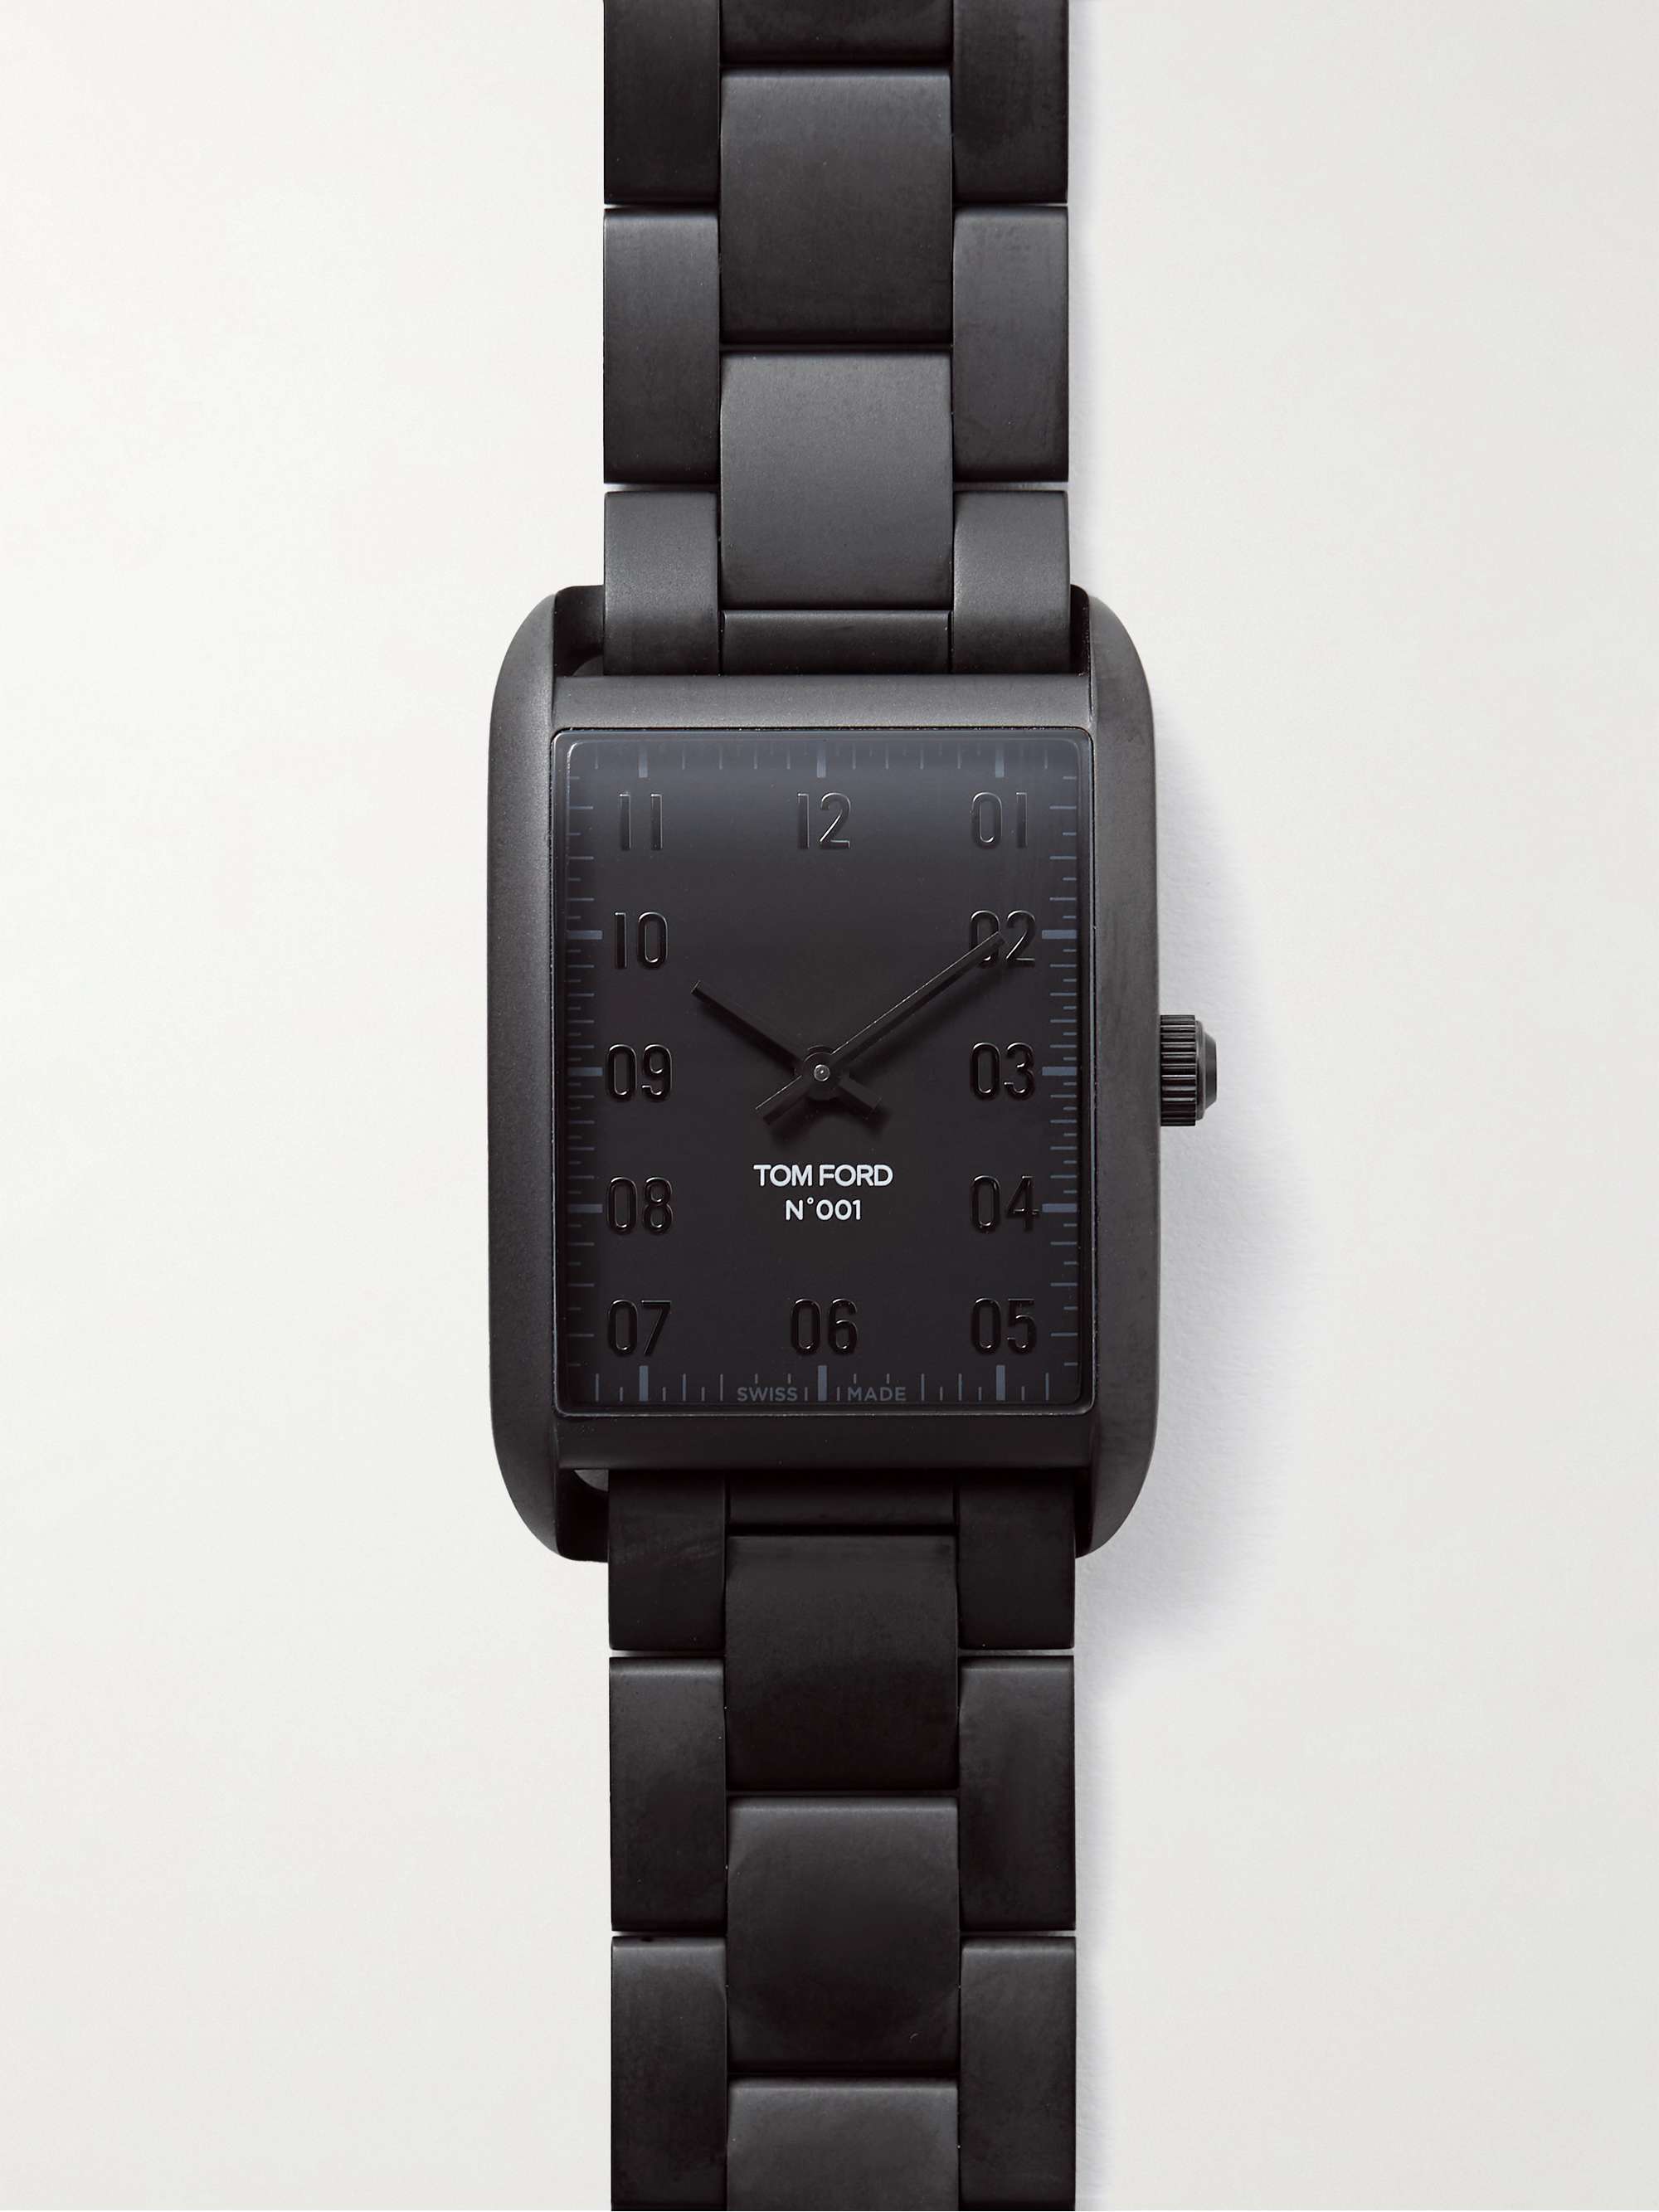 TOM FORD TIMEPIECES 001 DLC-Coated Stainless Steel Watch